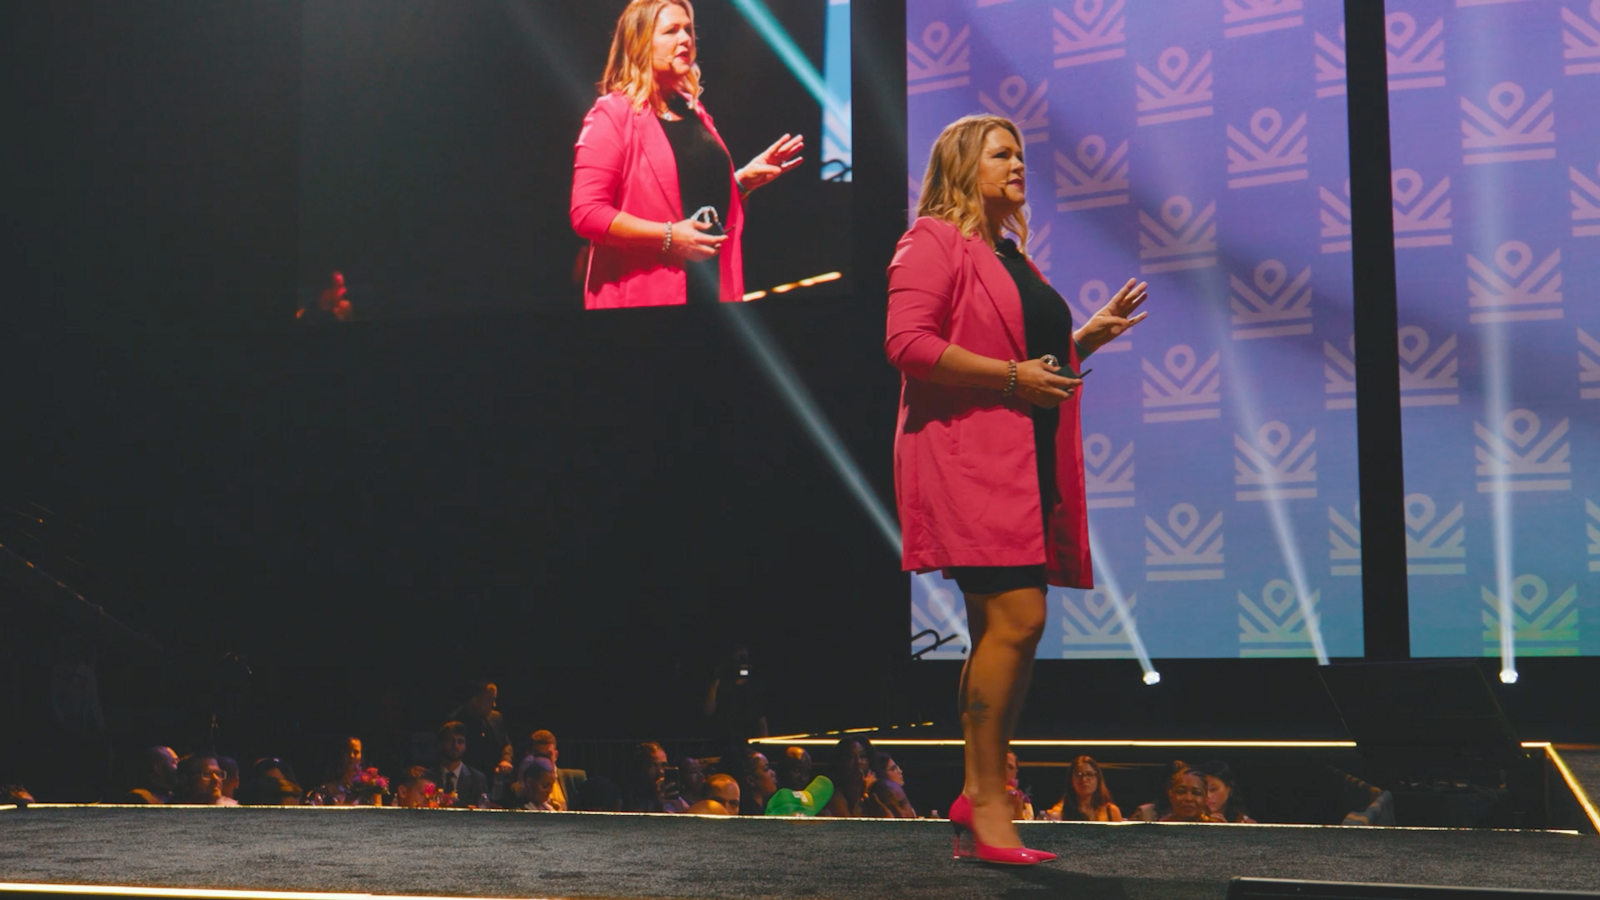 Business coach Melanie Greenough speaking on a stage